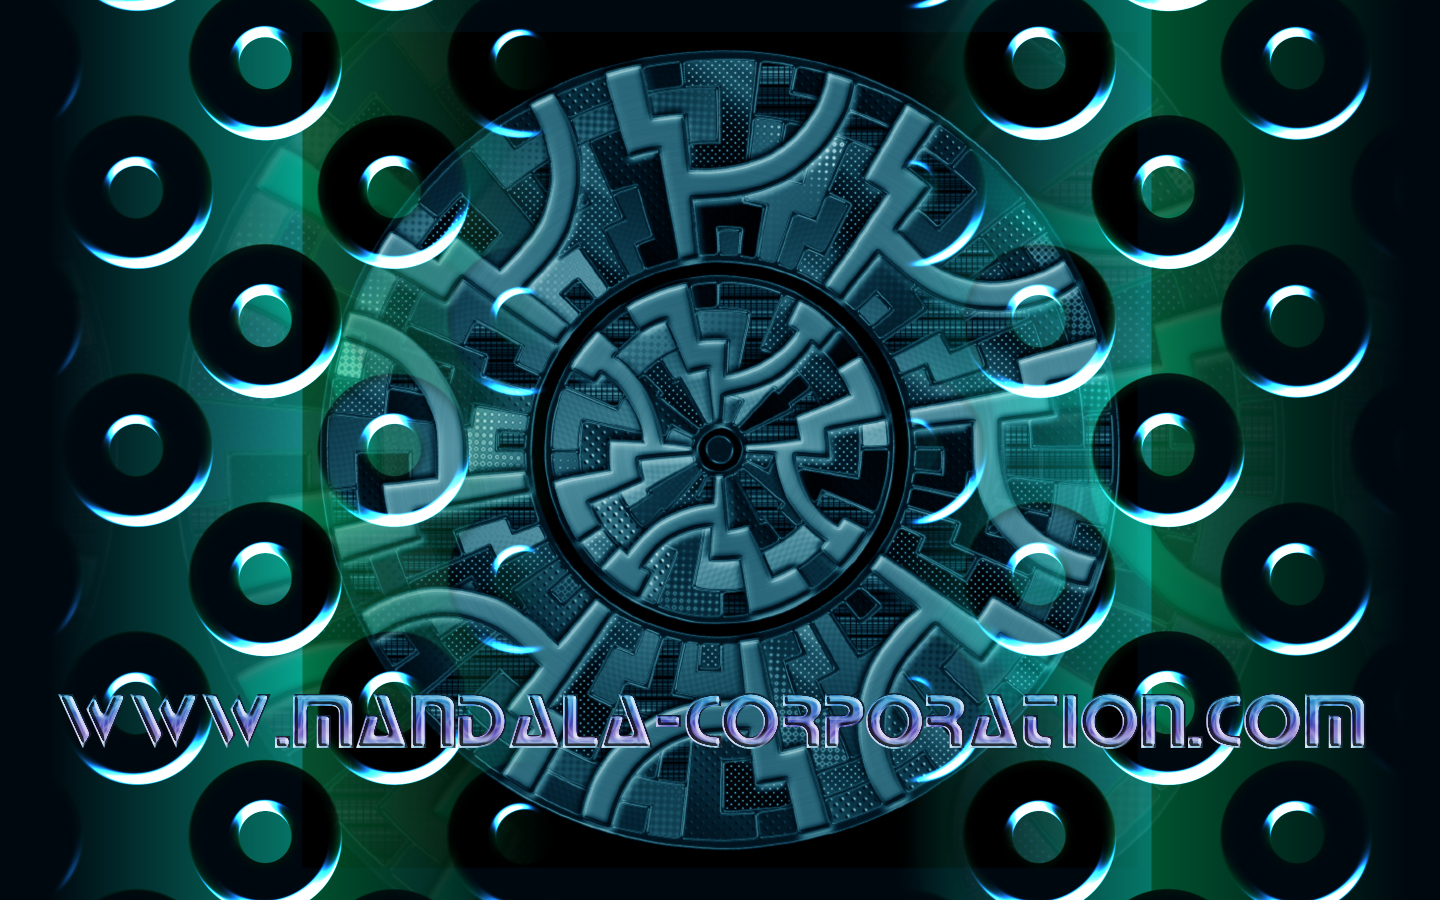  mandala corporation all rights reserved